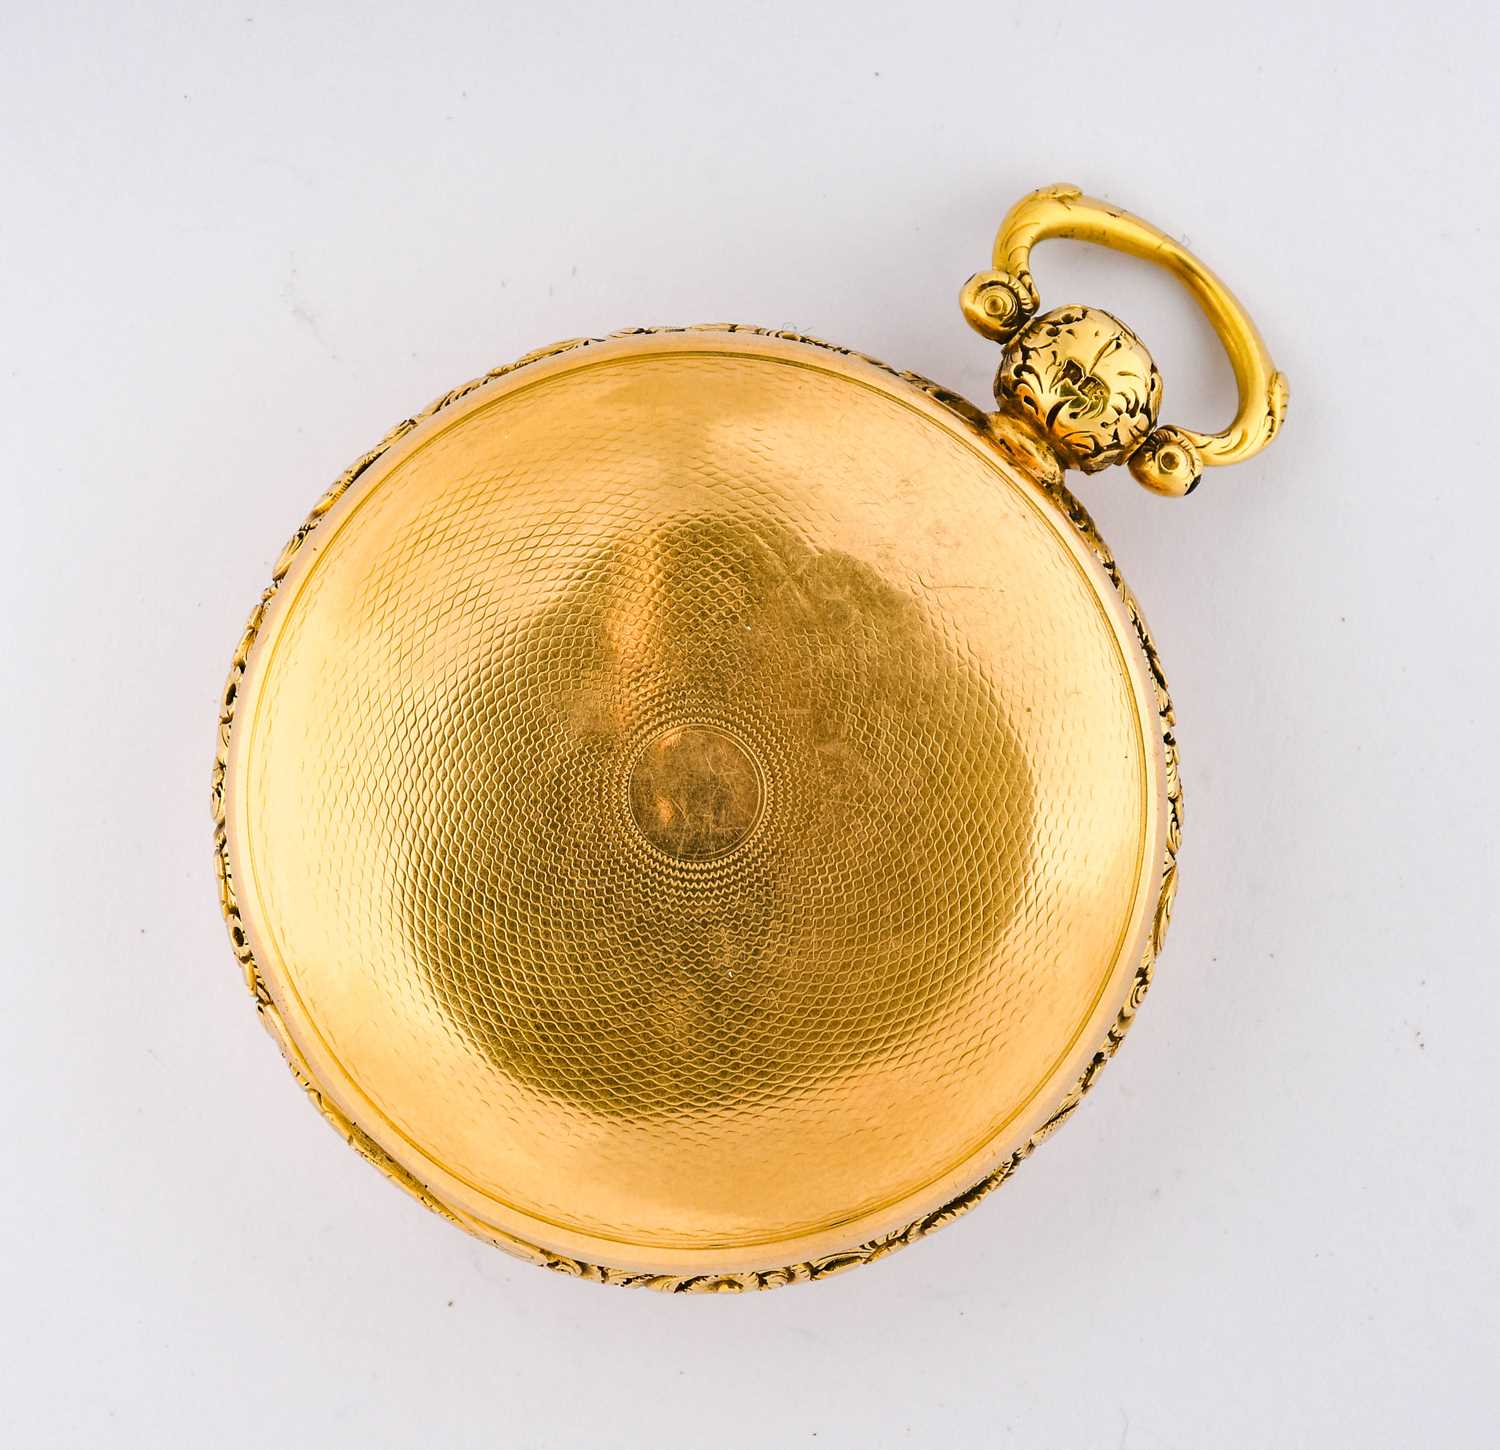 Moncas: An 18 Carat Gold Full Hunter Pocket Watch, signed John Moncas, Liverpool, 1823, single fusee - Image 2 of 3